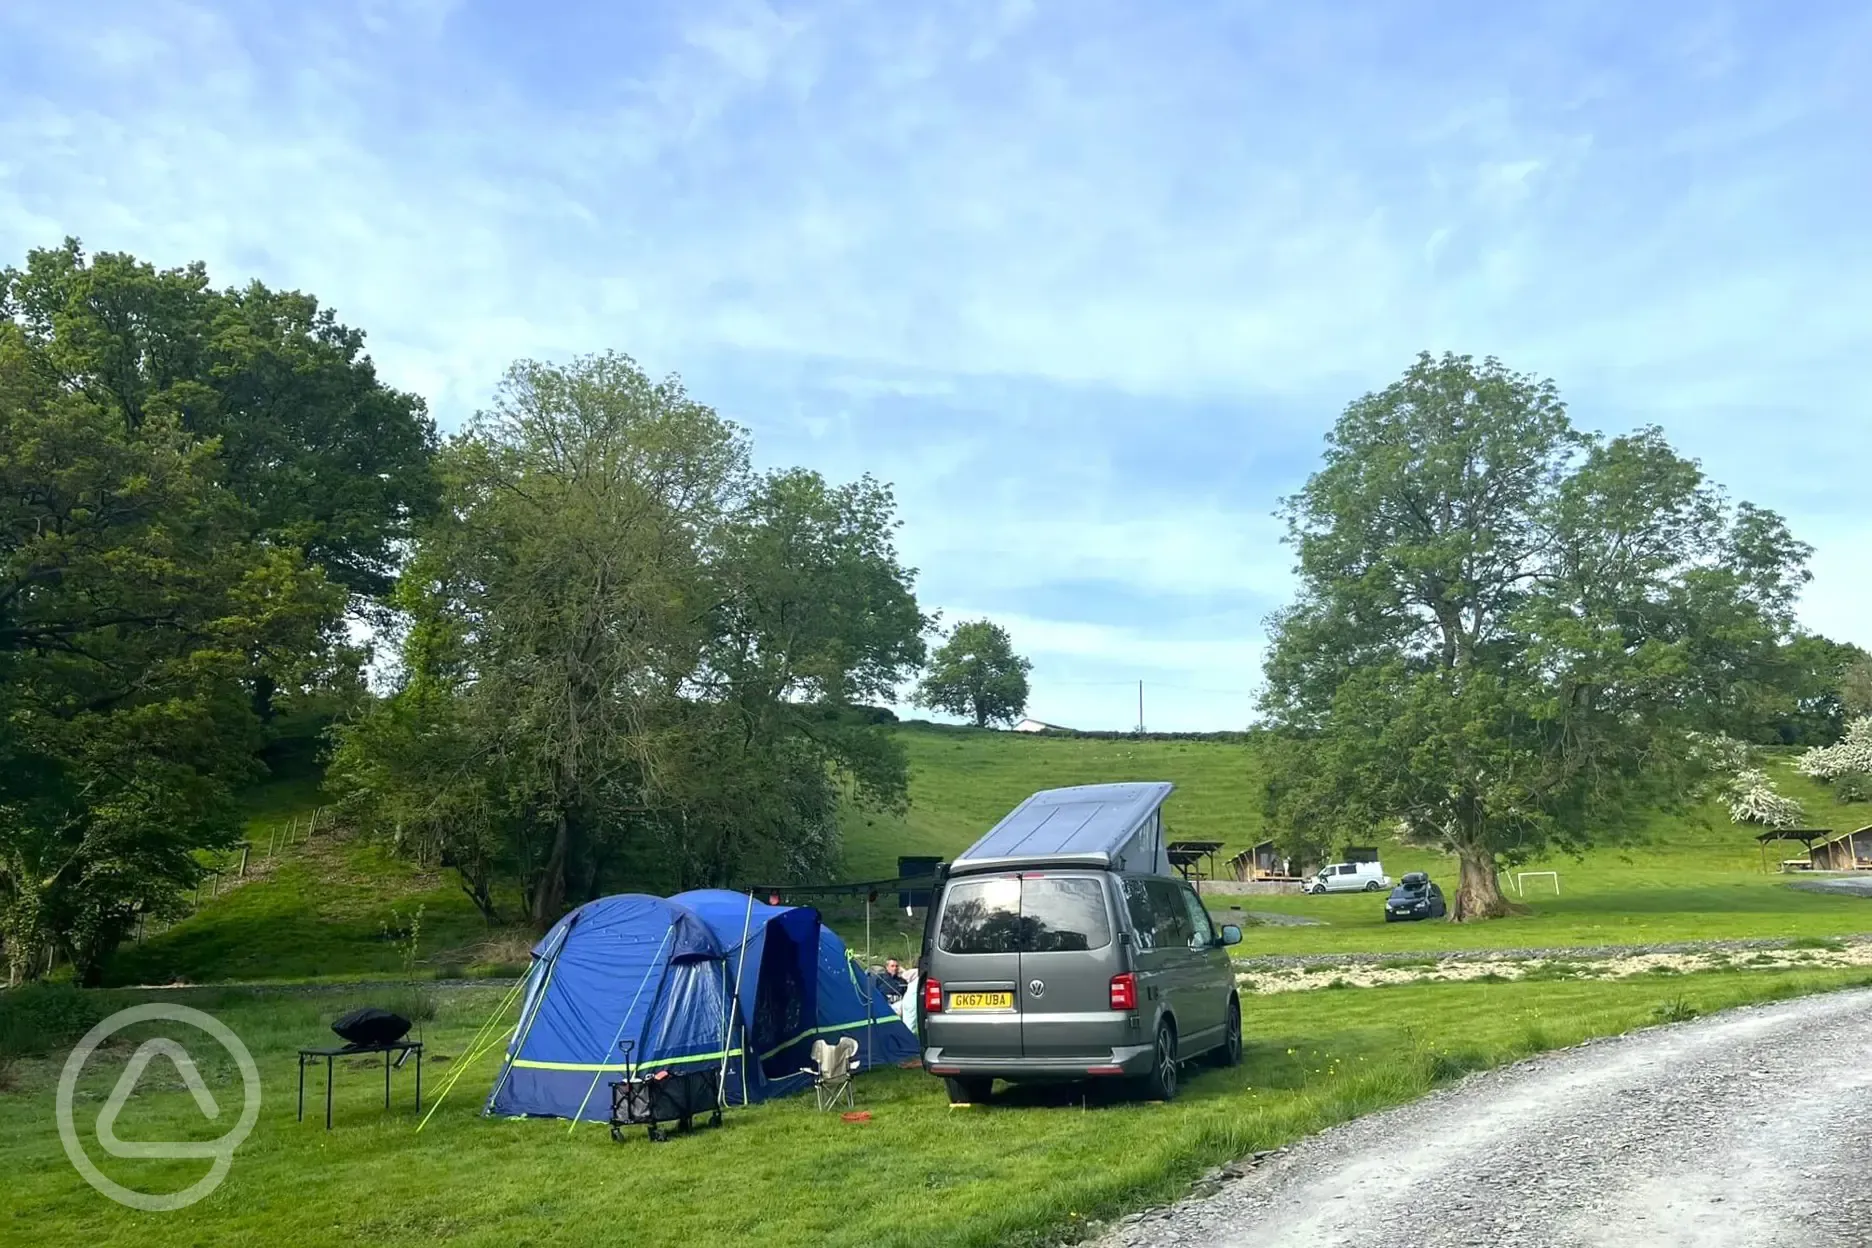 Grass campervan and tent pitch